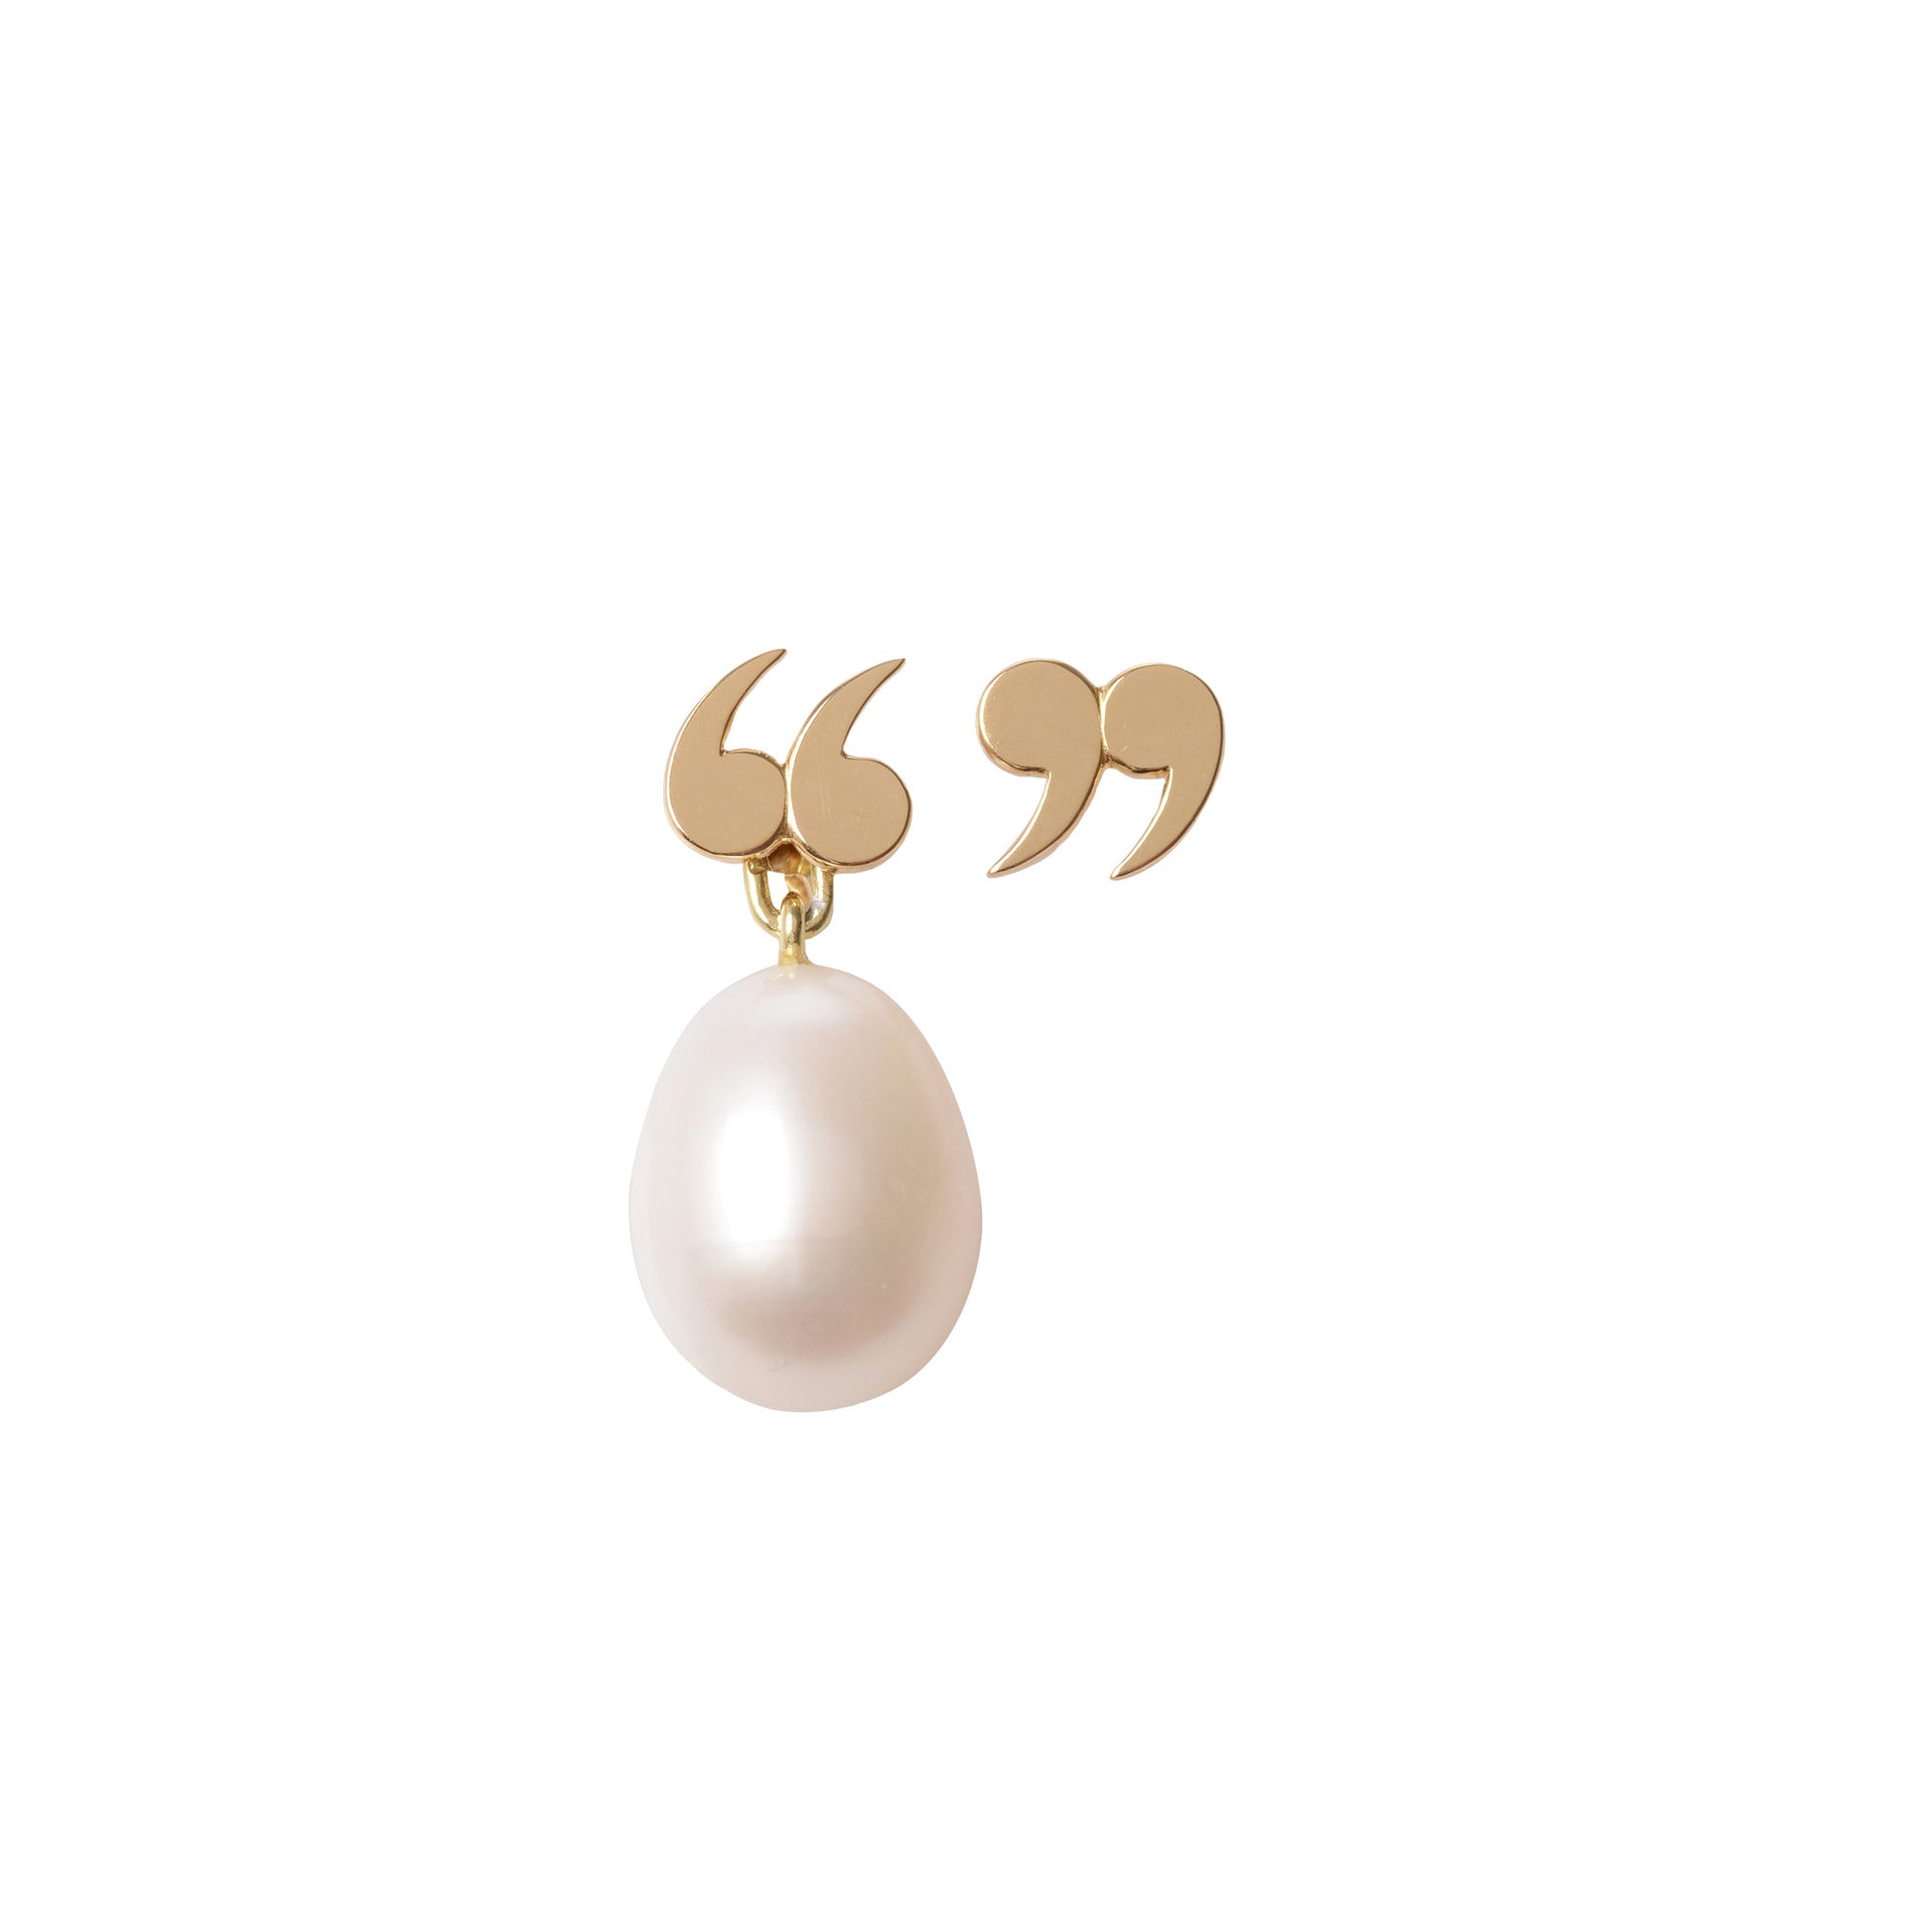 Quote Un-Quote Earrings with Pearl by McFarlane Fine Jewellery